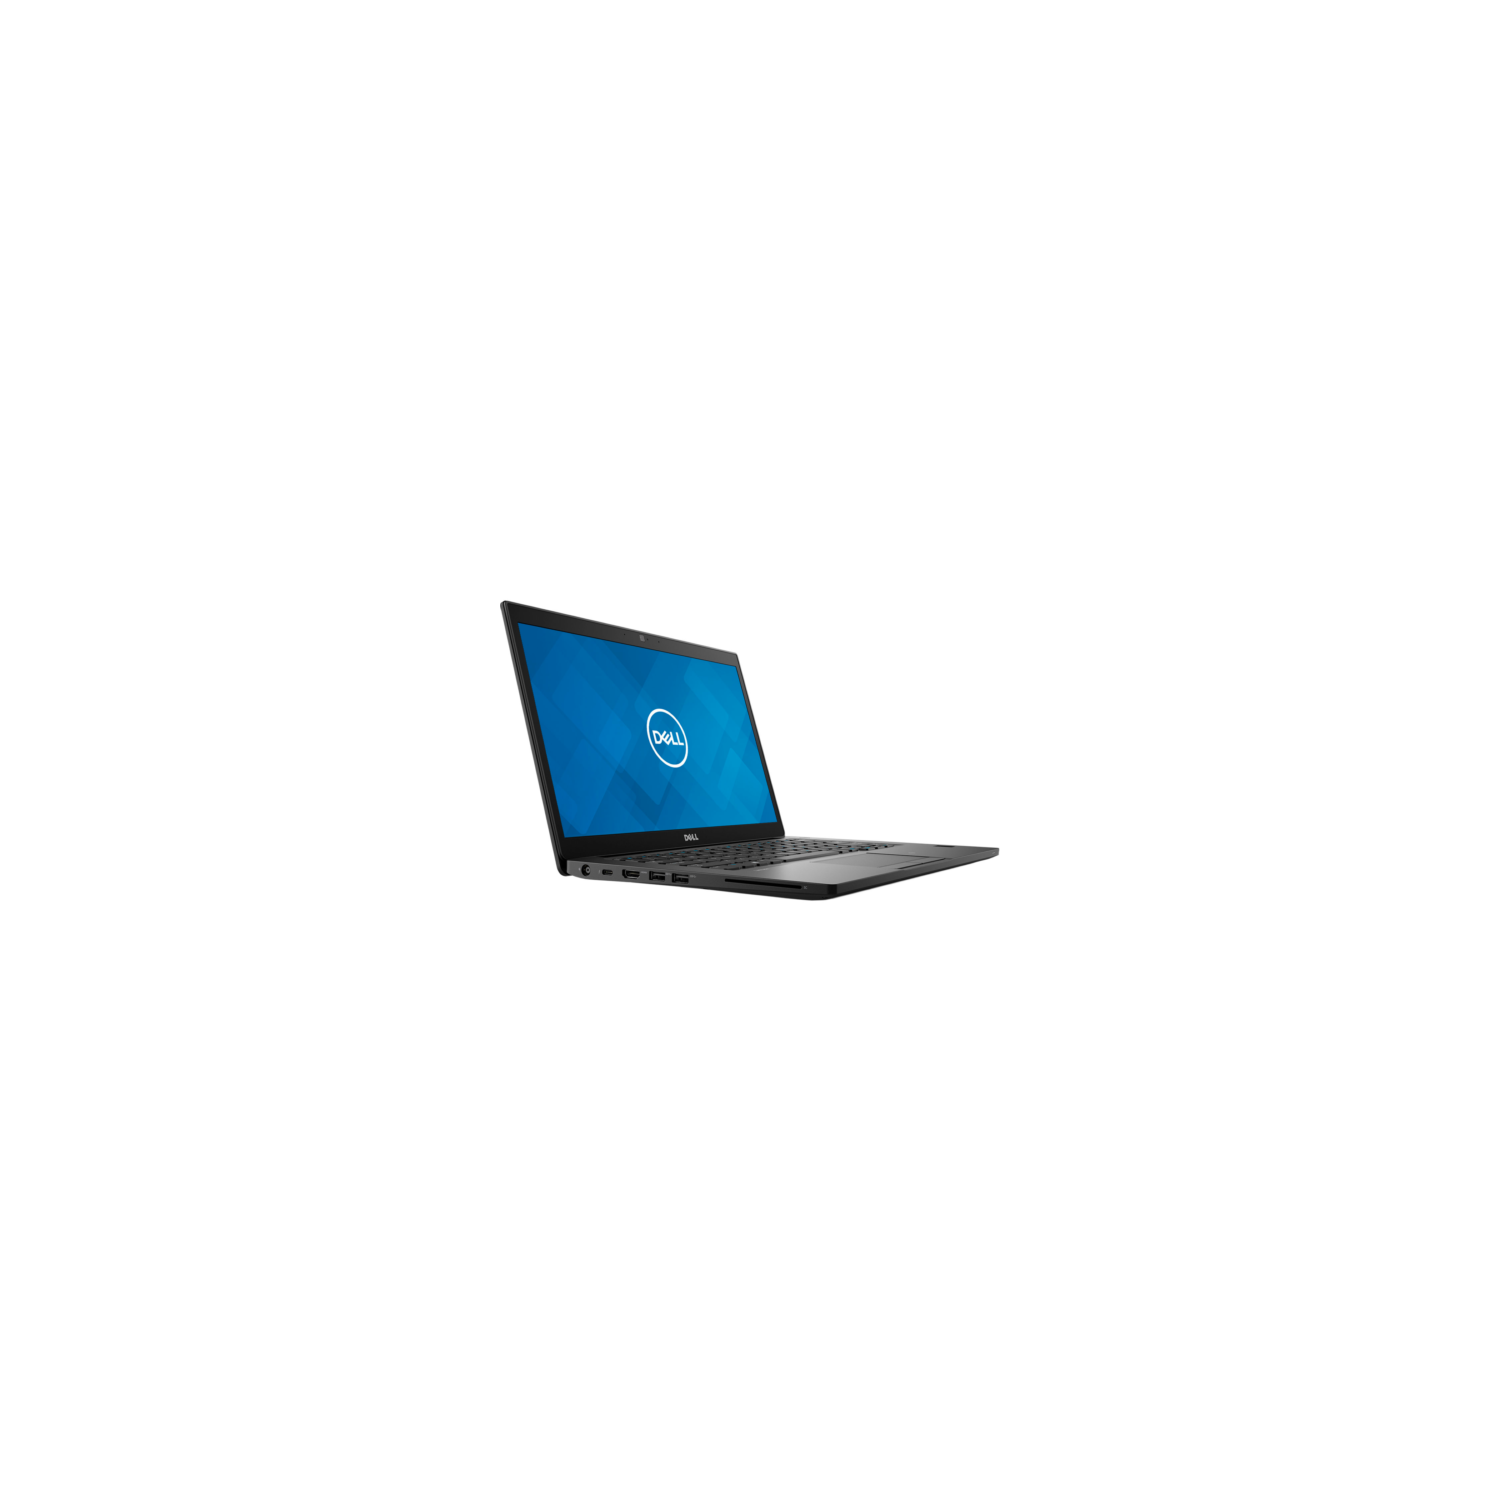 Refurbished (Excellent) DELL Latitude 7490 Laptop 14 FHD (Intel Graphics / I7-8650U / 16GB / 512GB / Windows 11 Pro) with brand new laptop bag